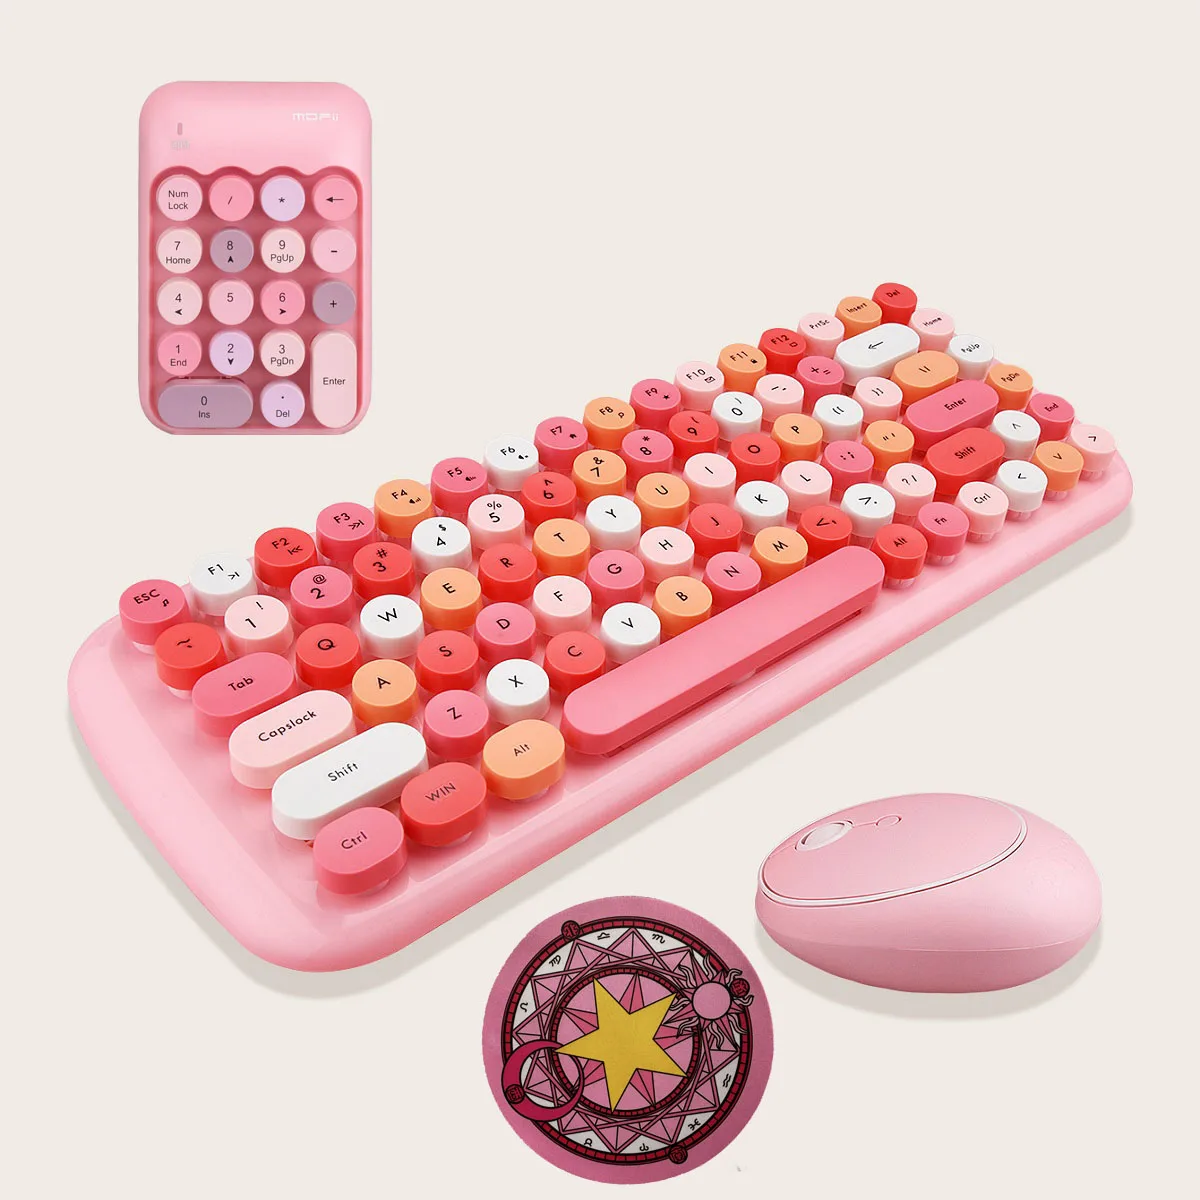 

Notebook 3 in 1 Wireless Keyboard Mouse Combos 2.4G Wireless Number Pad Pink Round Punk Mini Keyboard and Mouse Free Mouse Pad